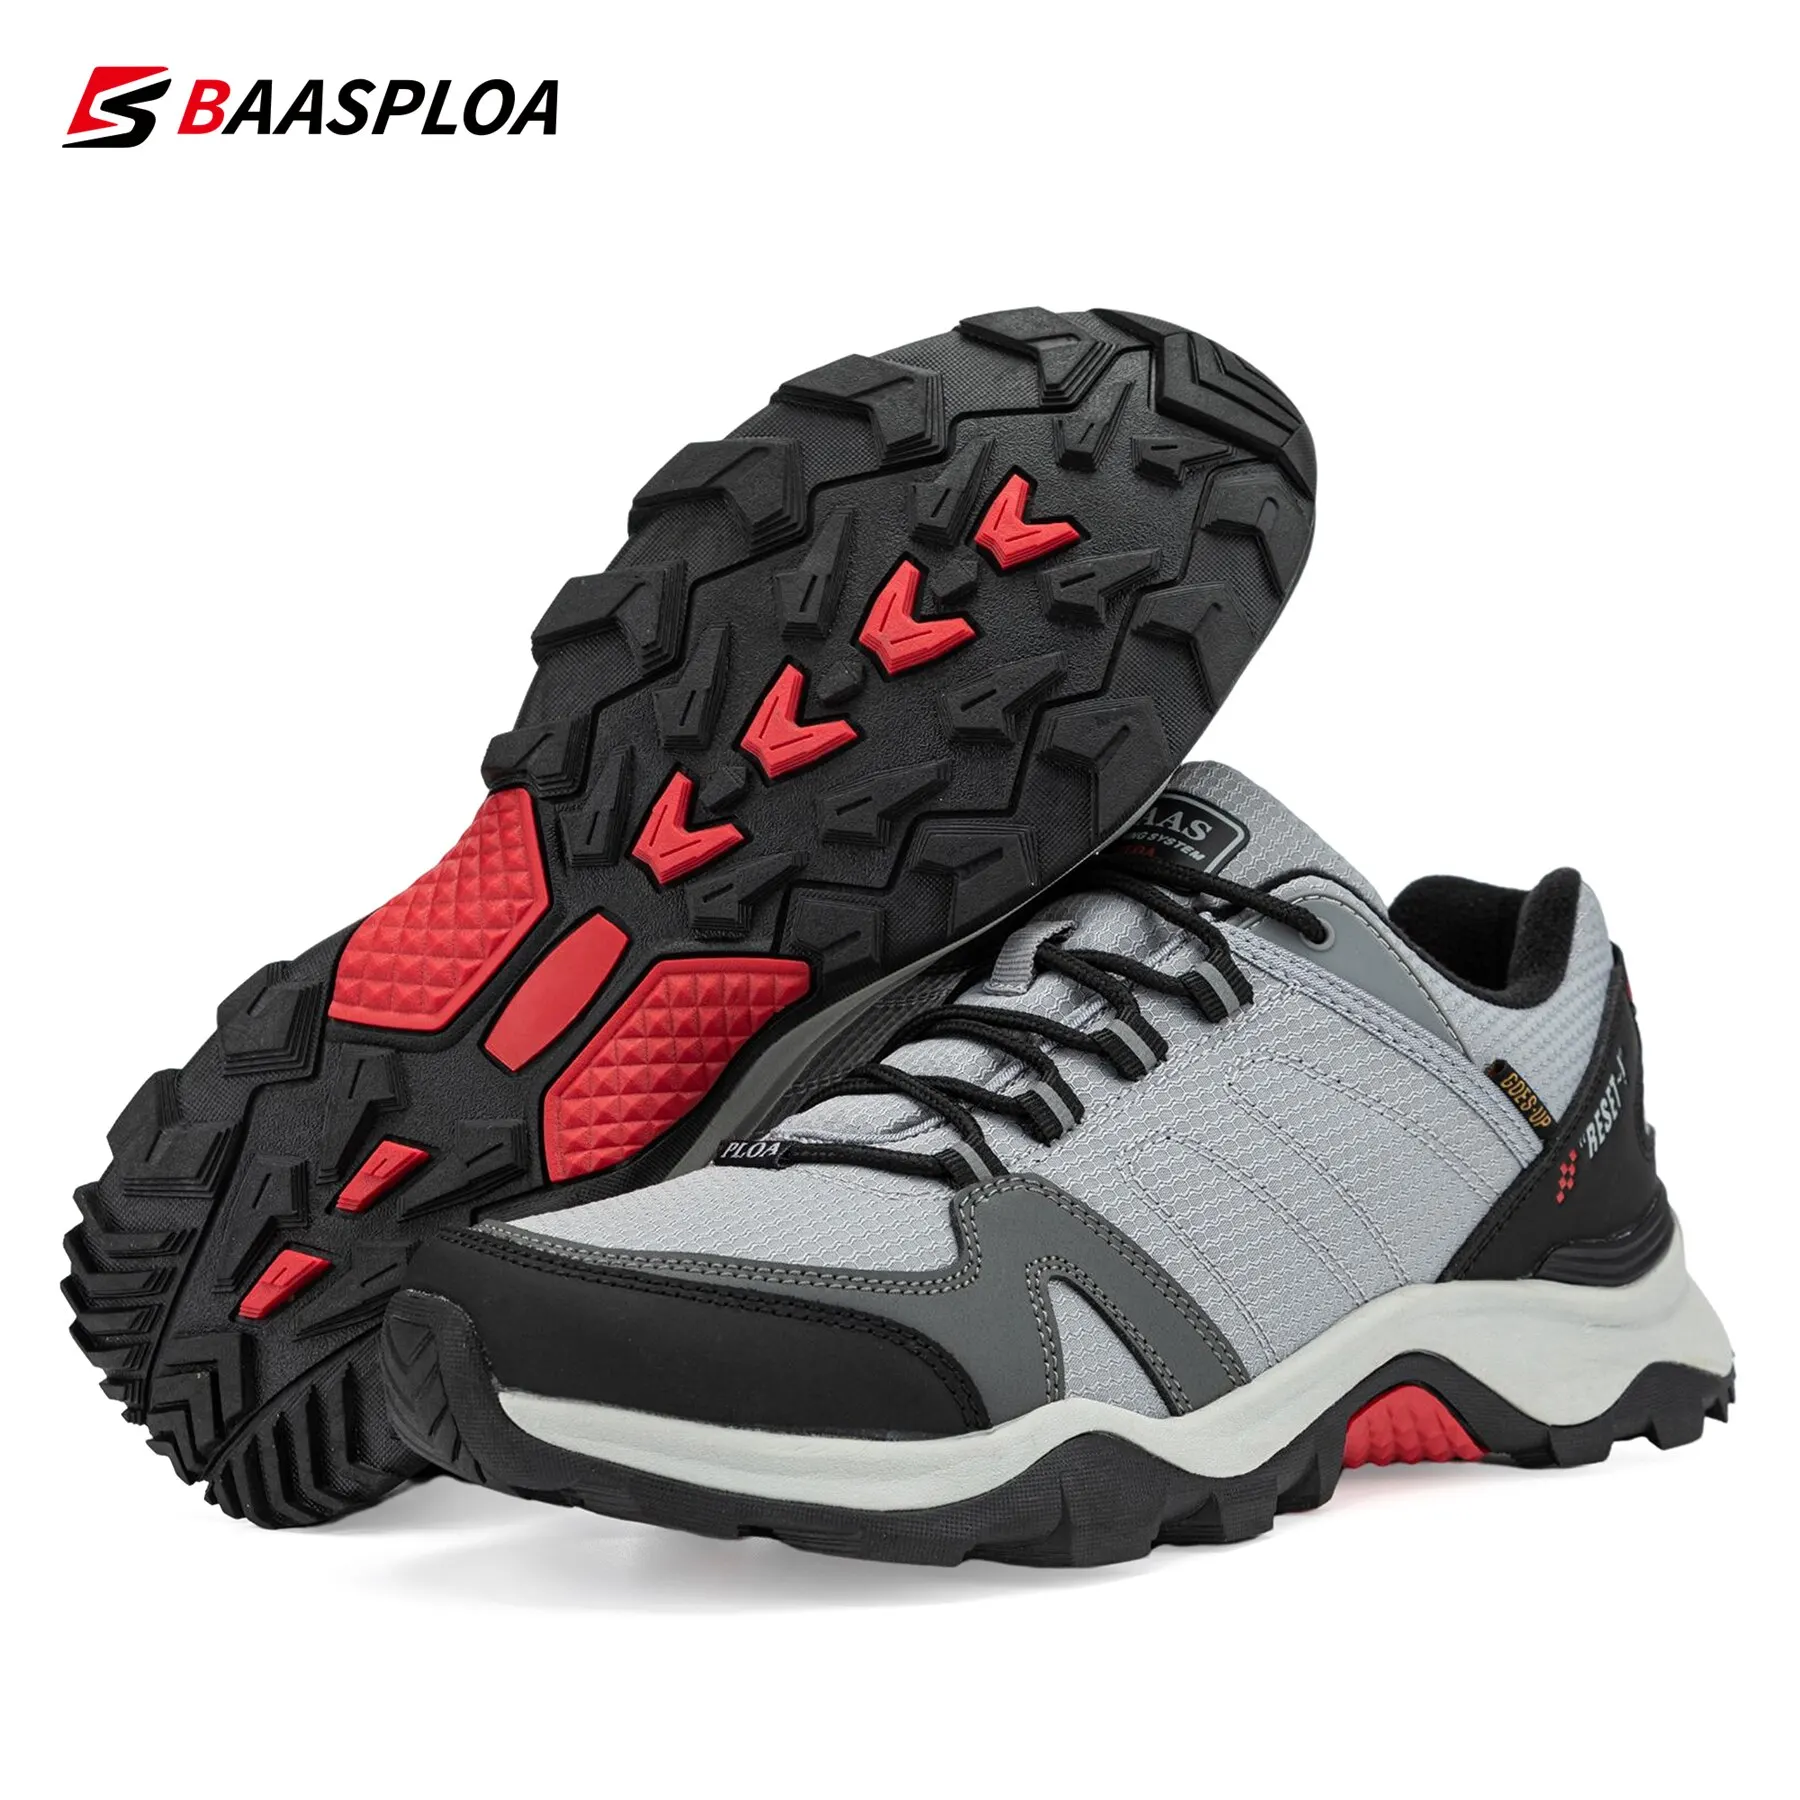 Baasploa Man Hiking Shoes Wear Resistant Sneakers Non Slip Camping Shoes Men Outdoor Sneaker Spring Autumn Waterproof Shoes 2